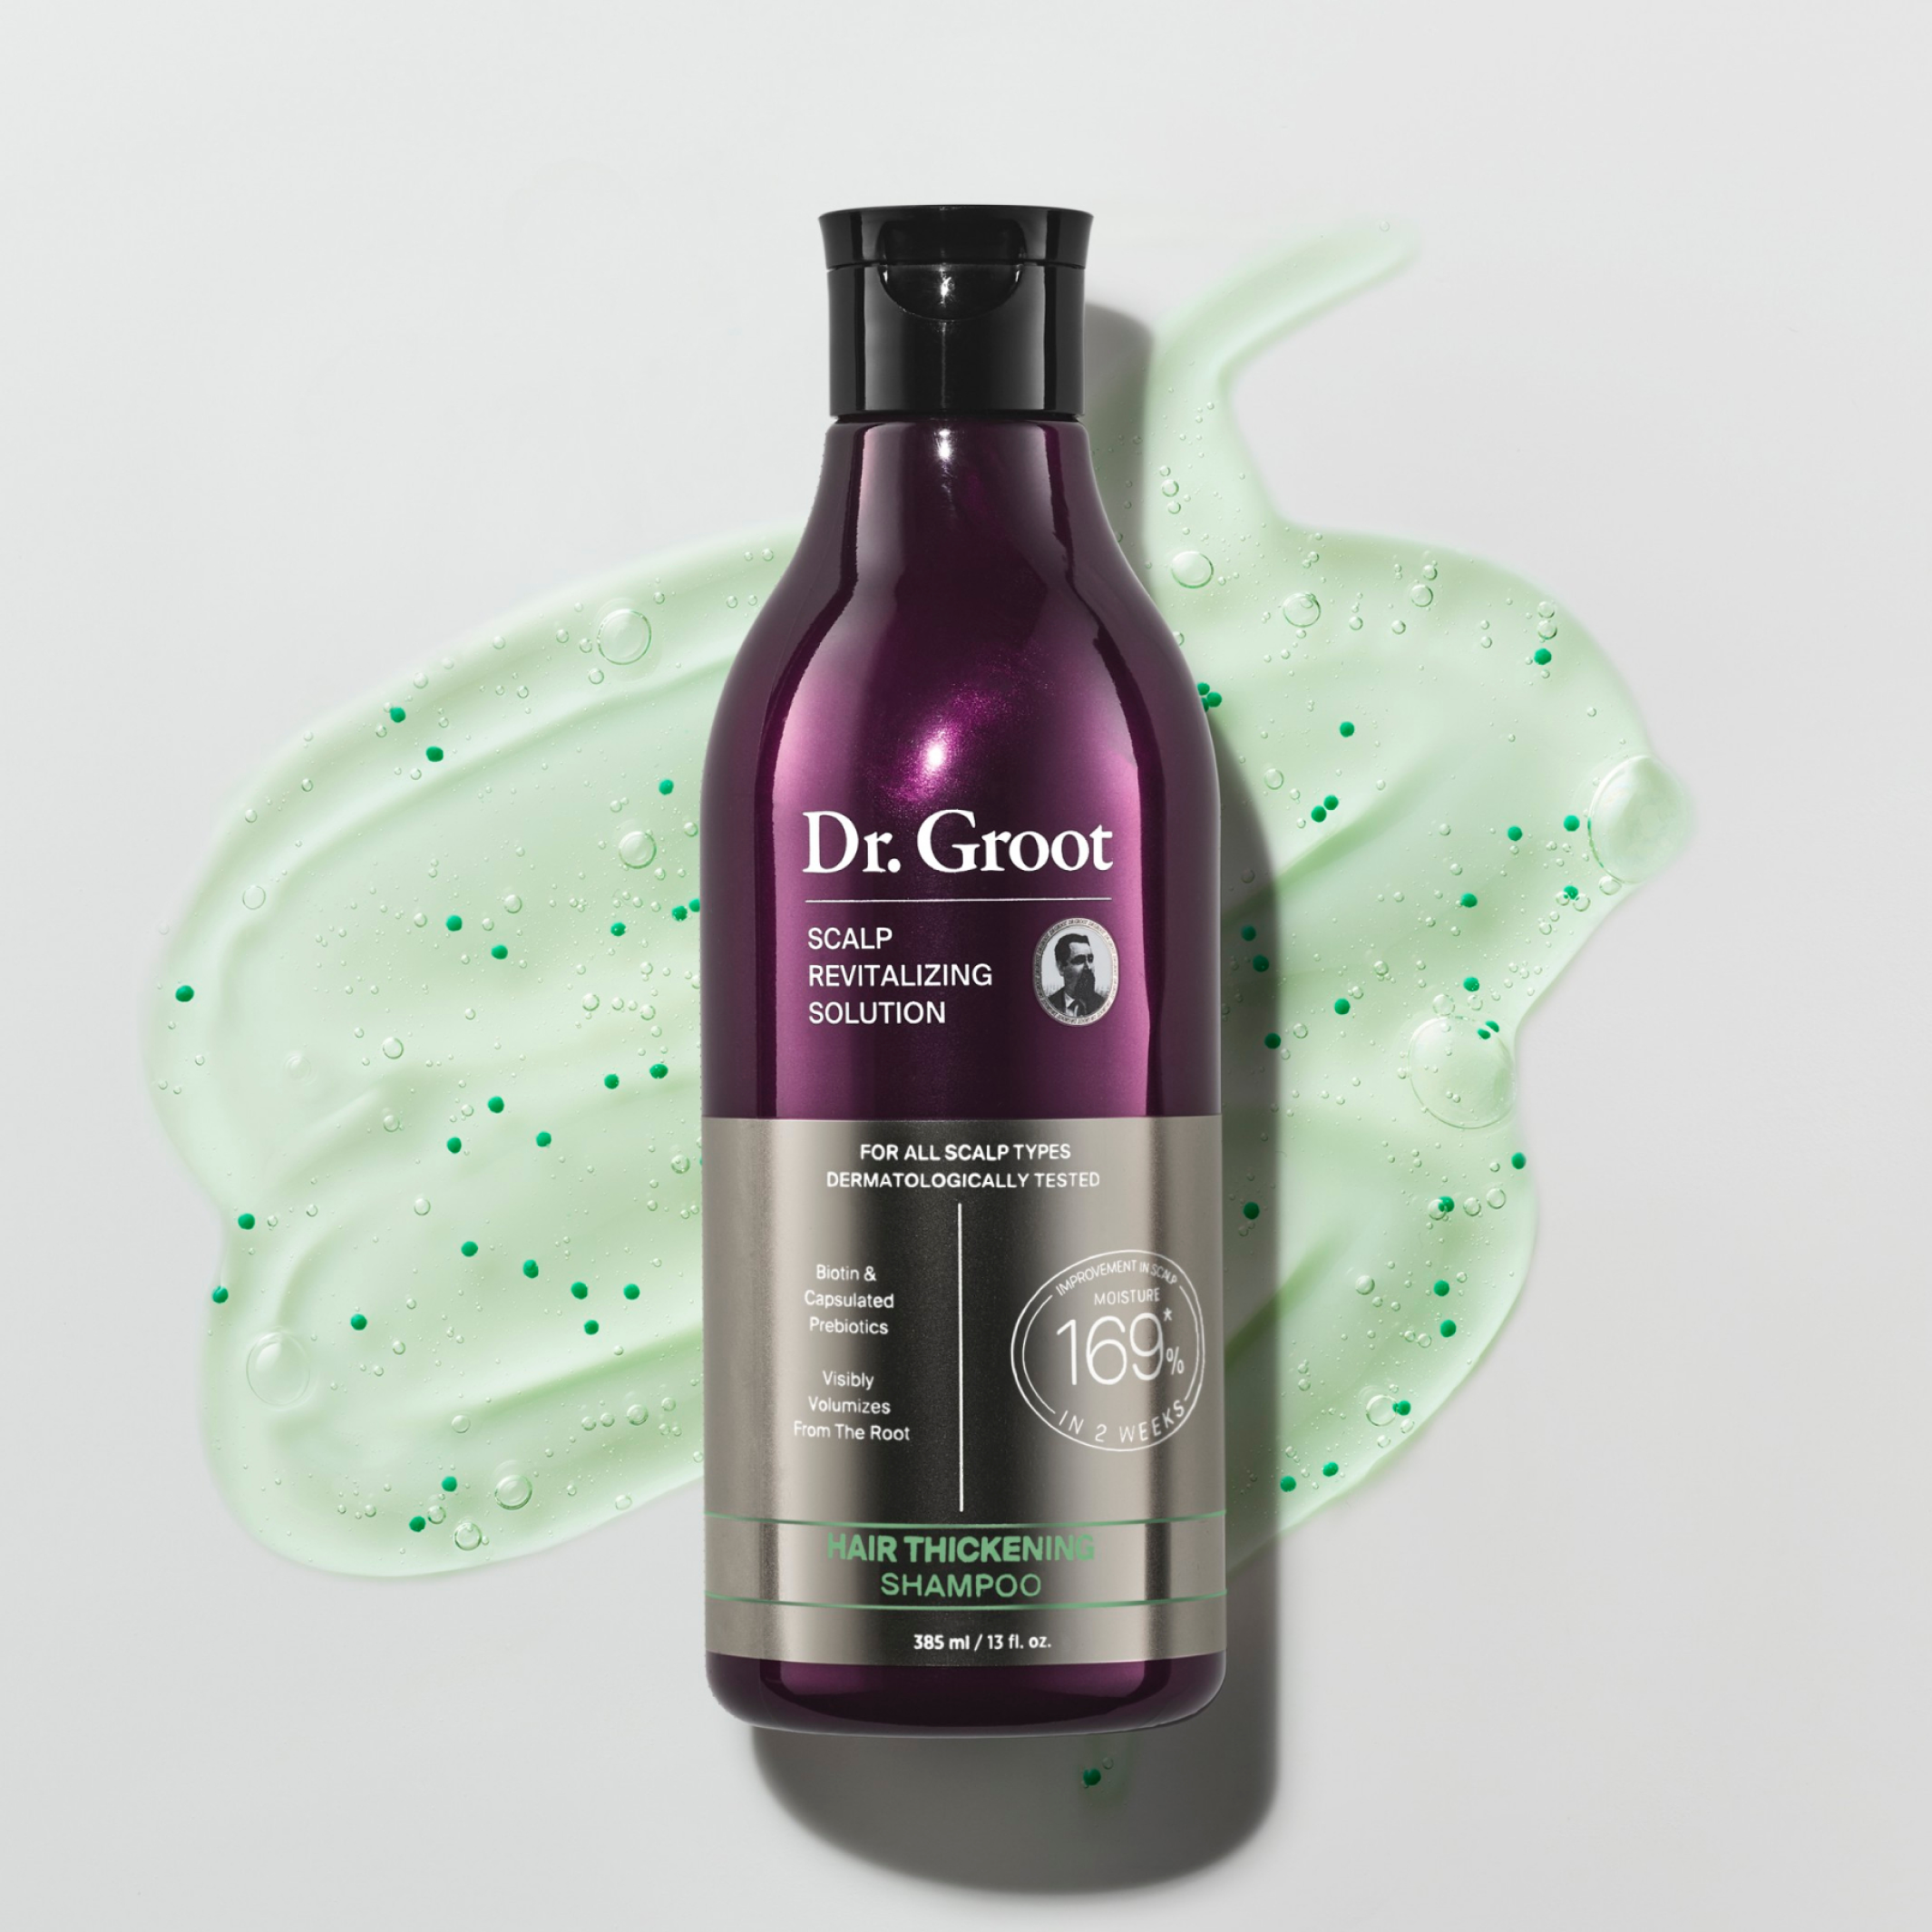 A dark purple bottle of Dr. Groot Hair Thickening Shampoo lying on a grey surface in a light green spread of the shampoo.